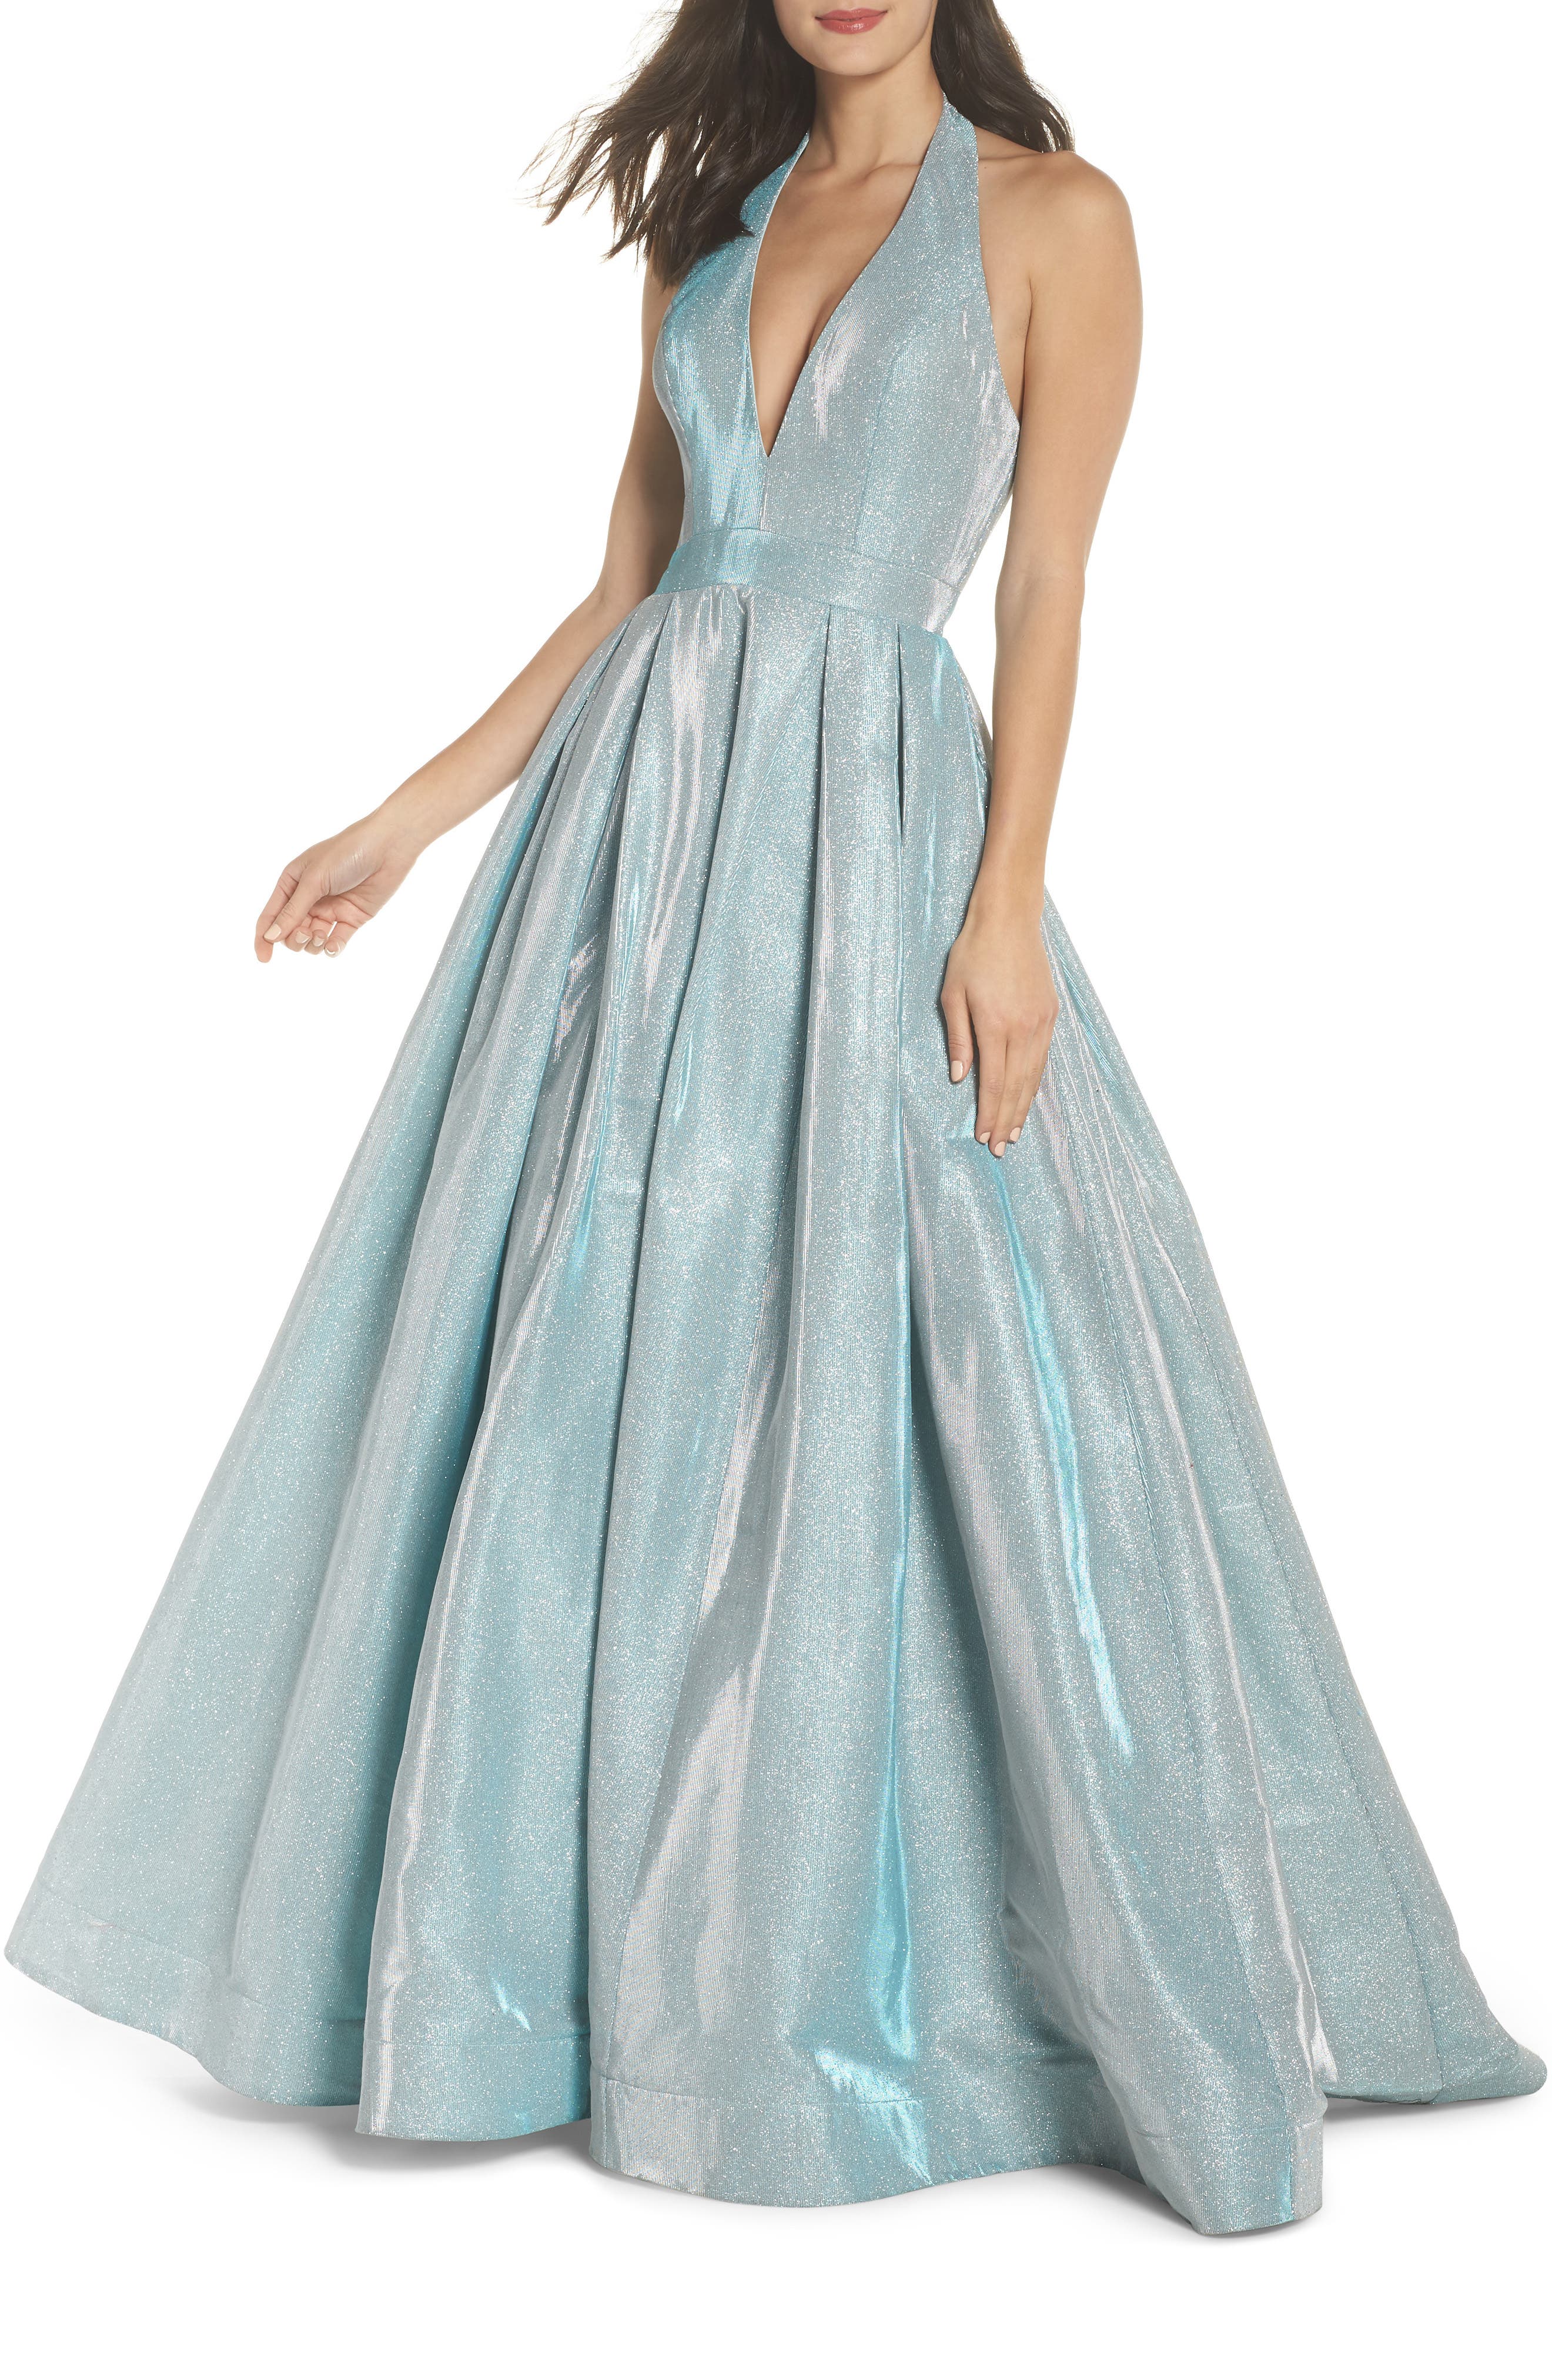 ball gown | Nordstrom